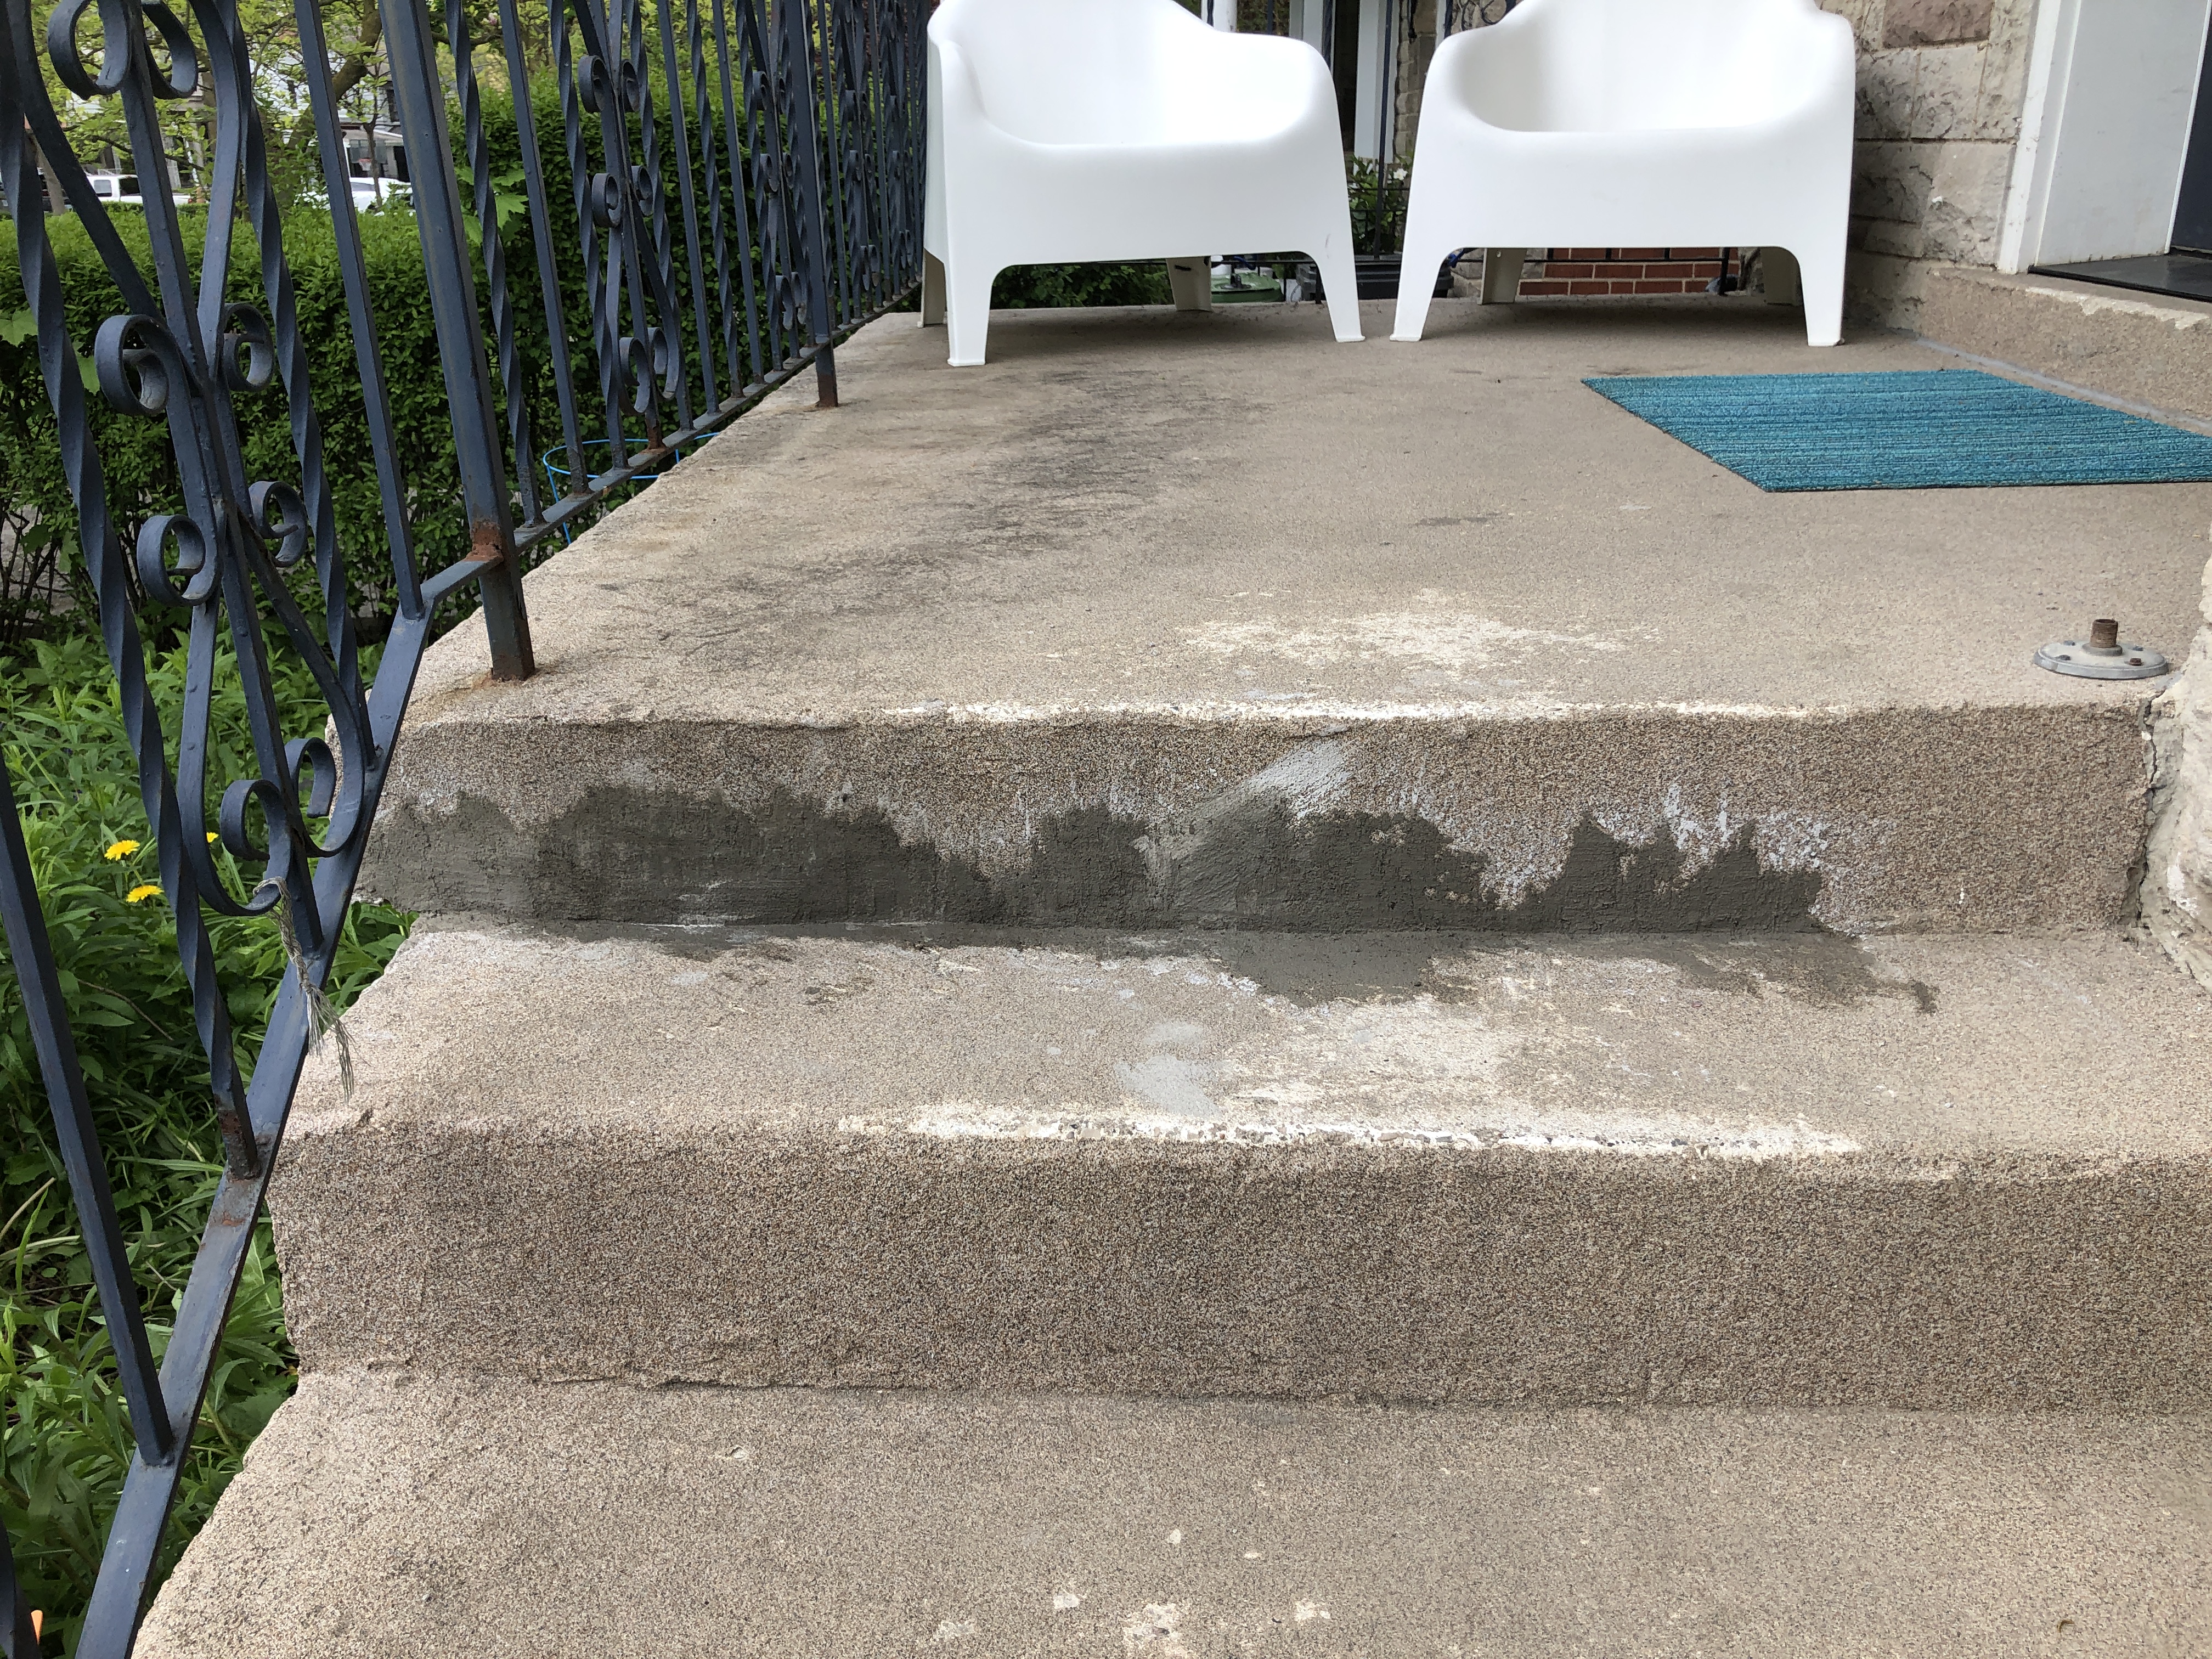 Concrete steps that have been patched. The cement is still wet.